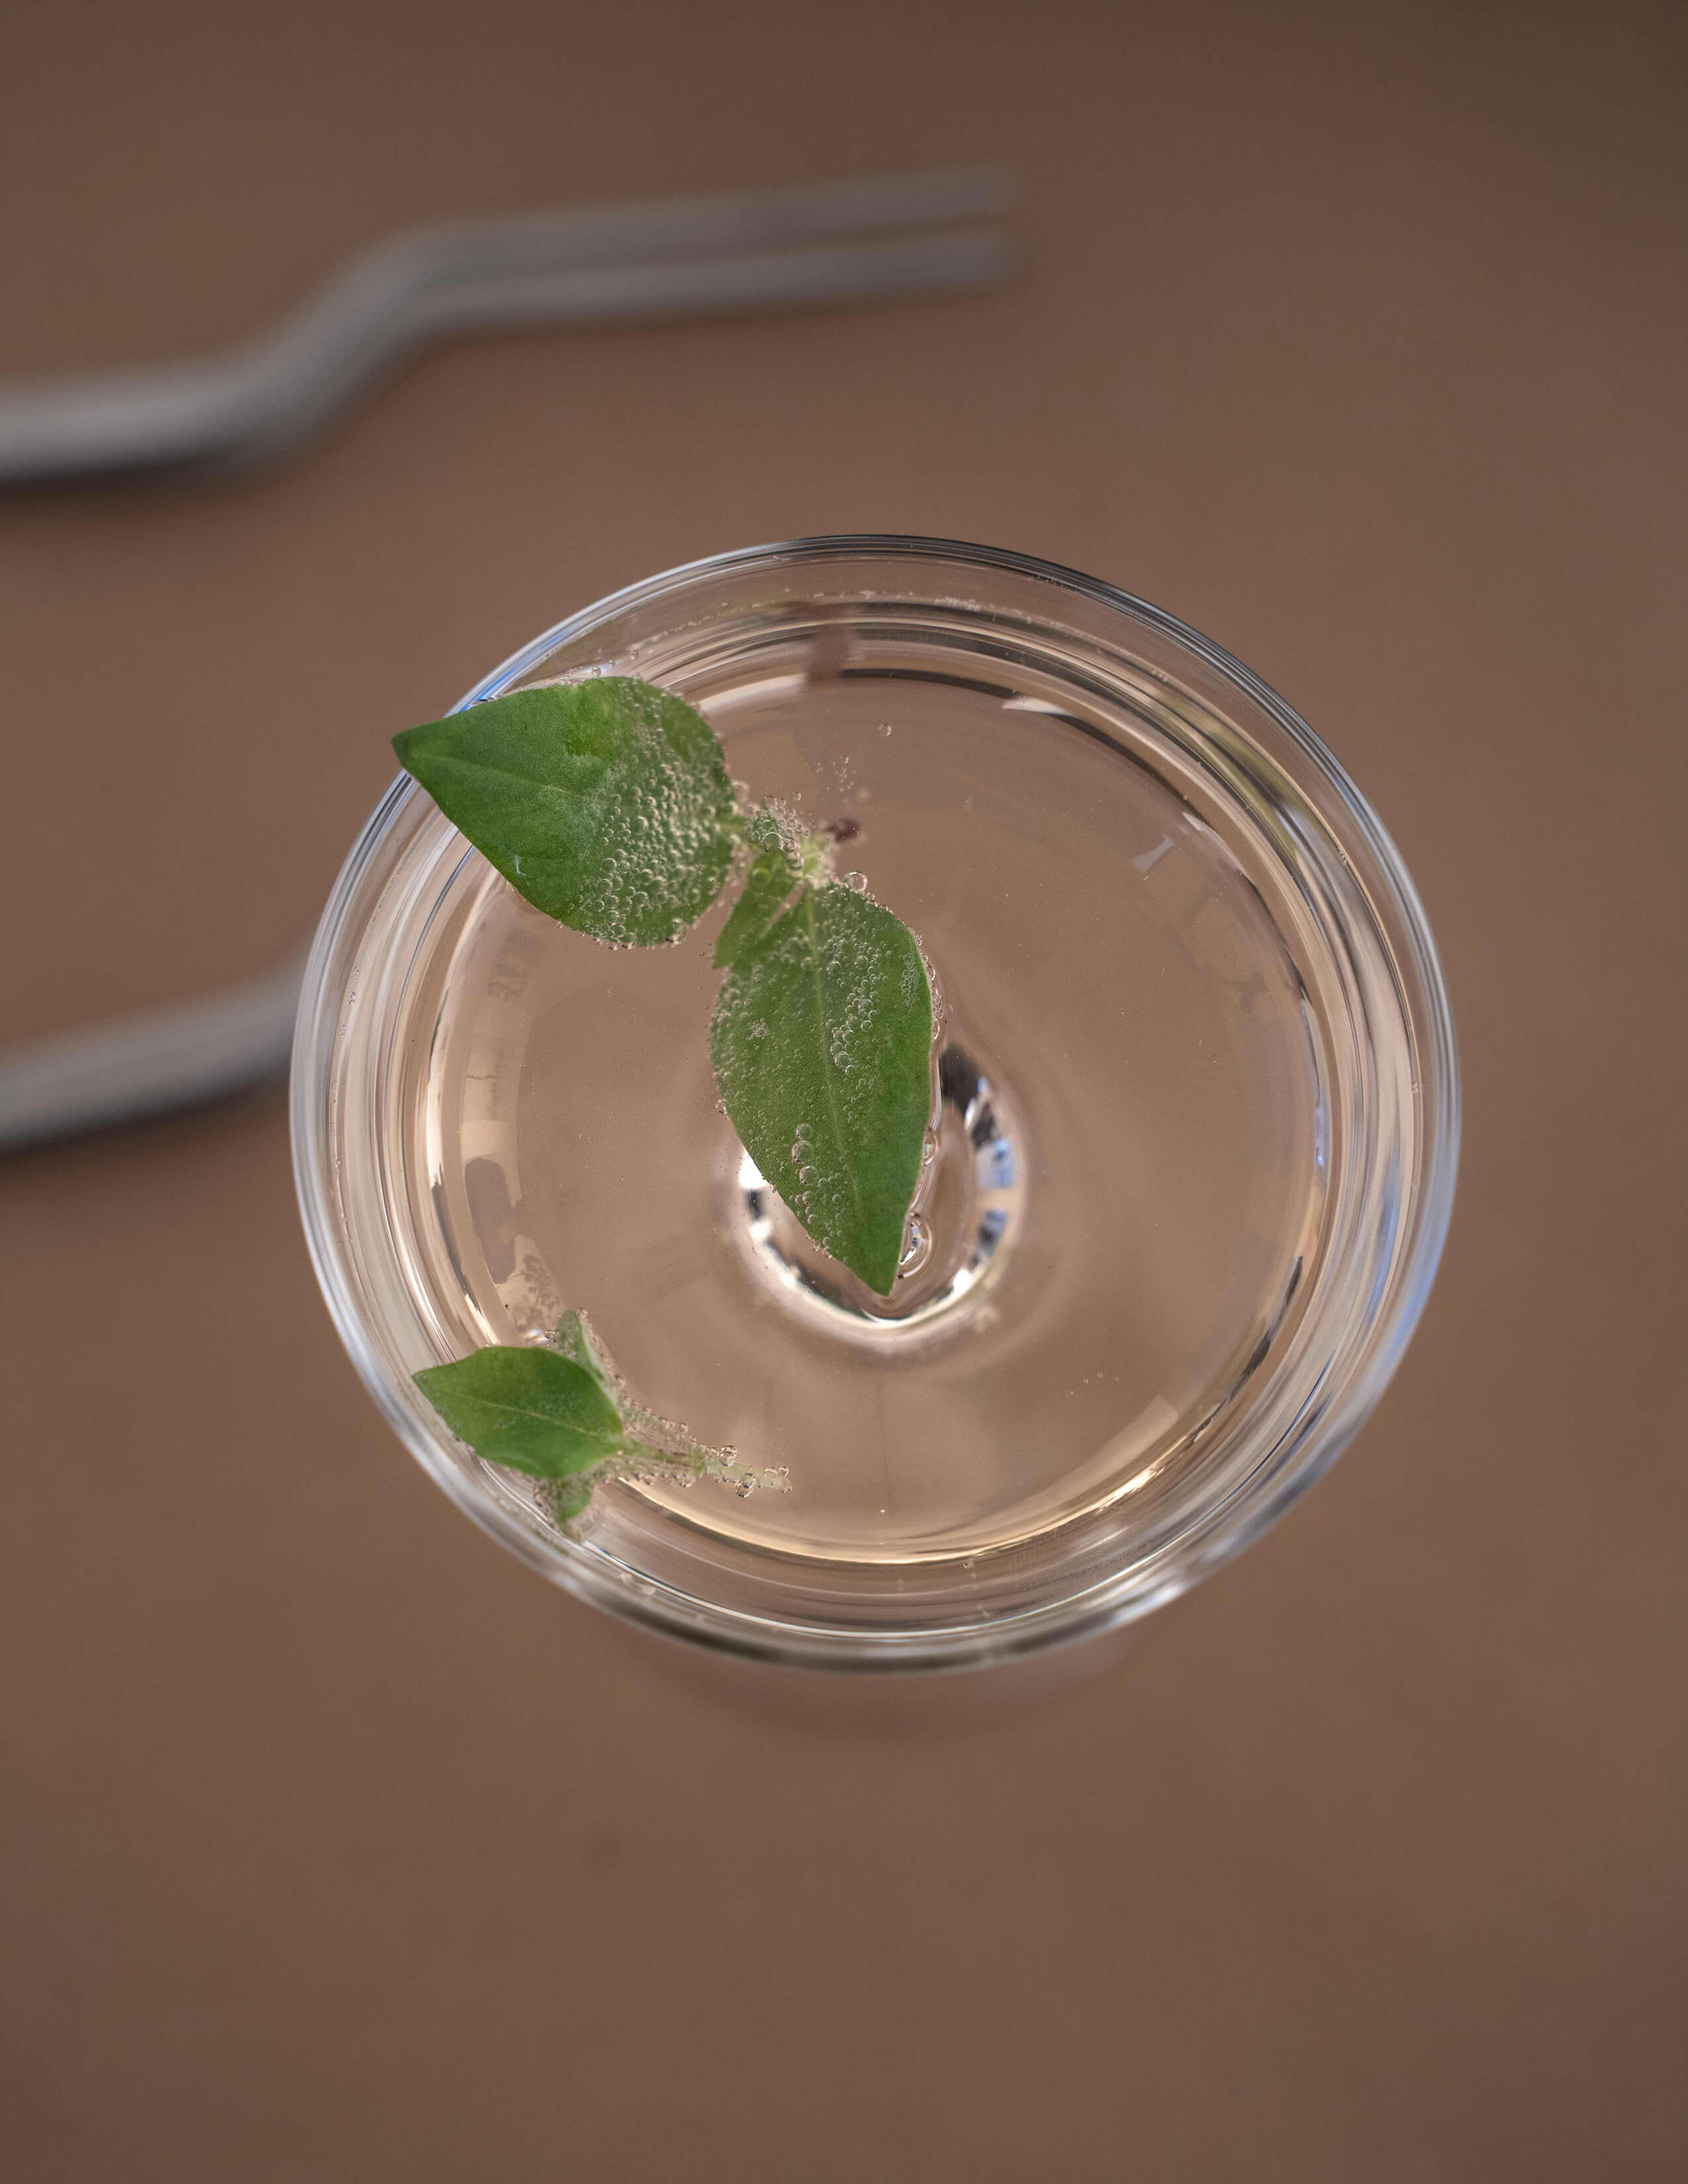 A photograph of a glass of drink from the above angle with herbal leaves in it.